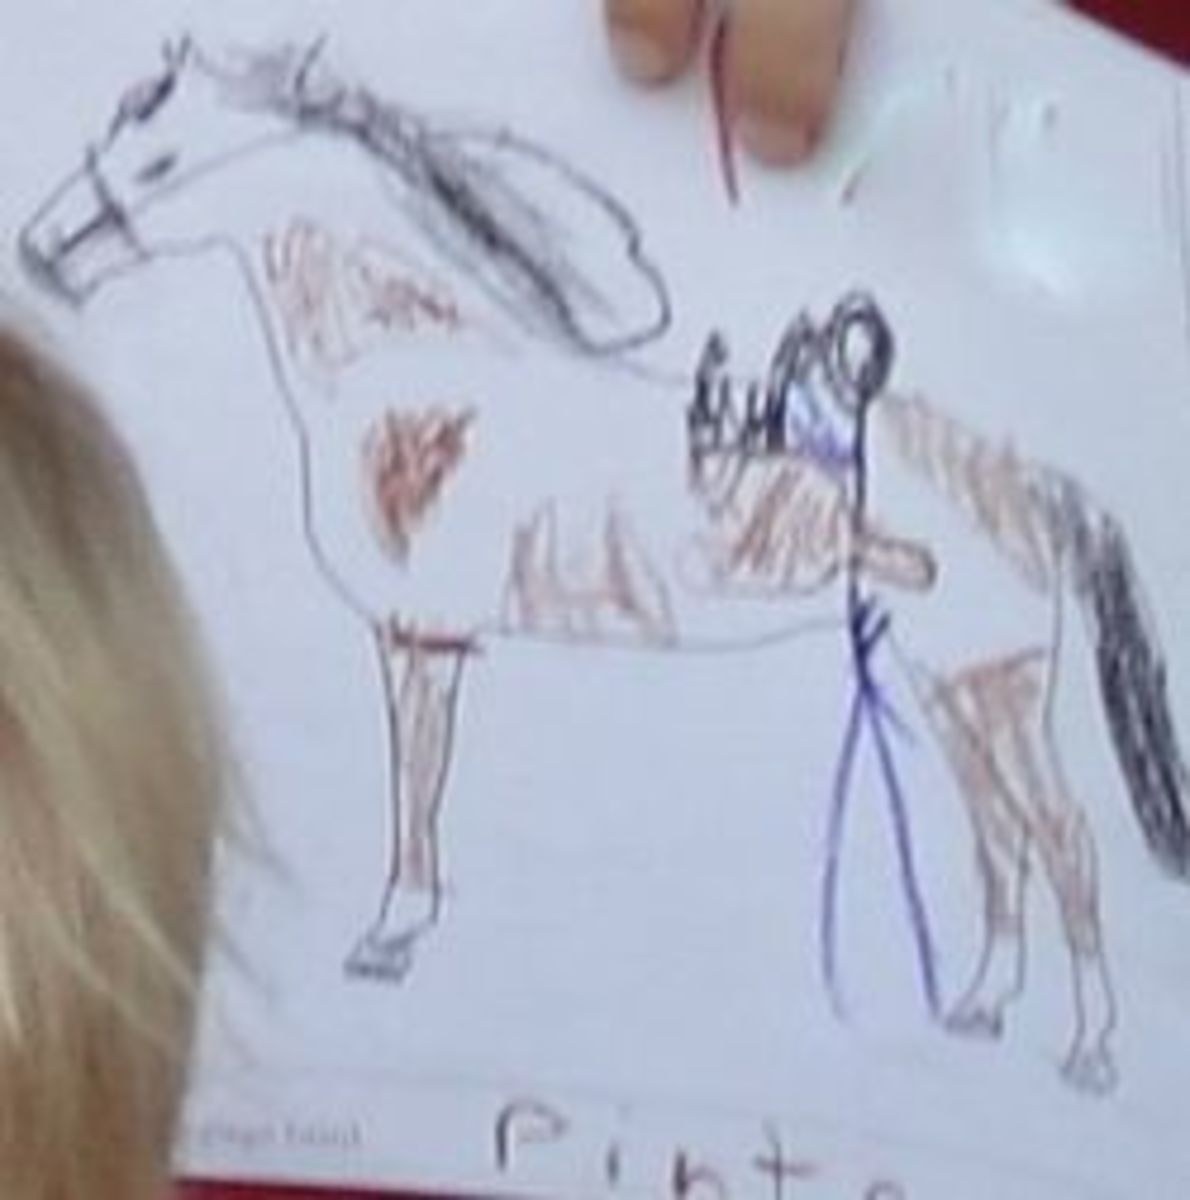 Coloring in a picture of her favorite horse breed, a pinto